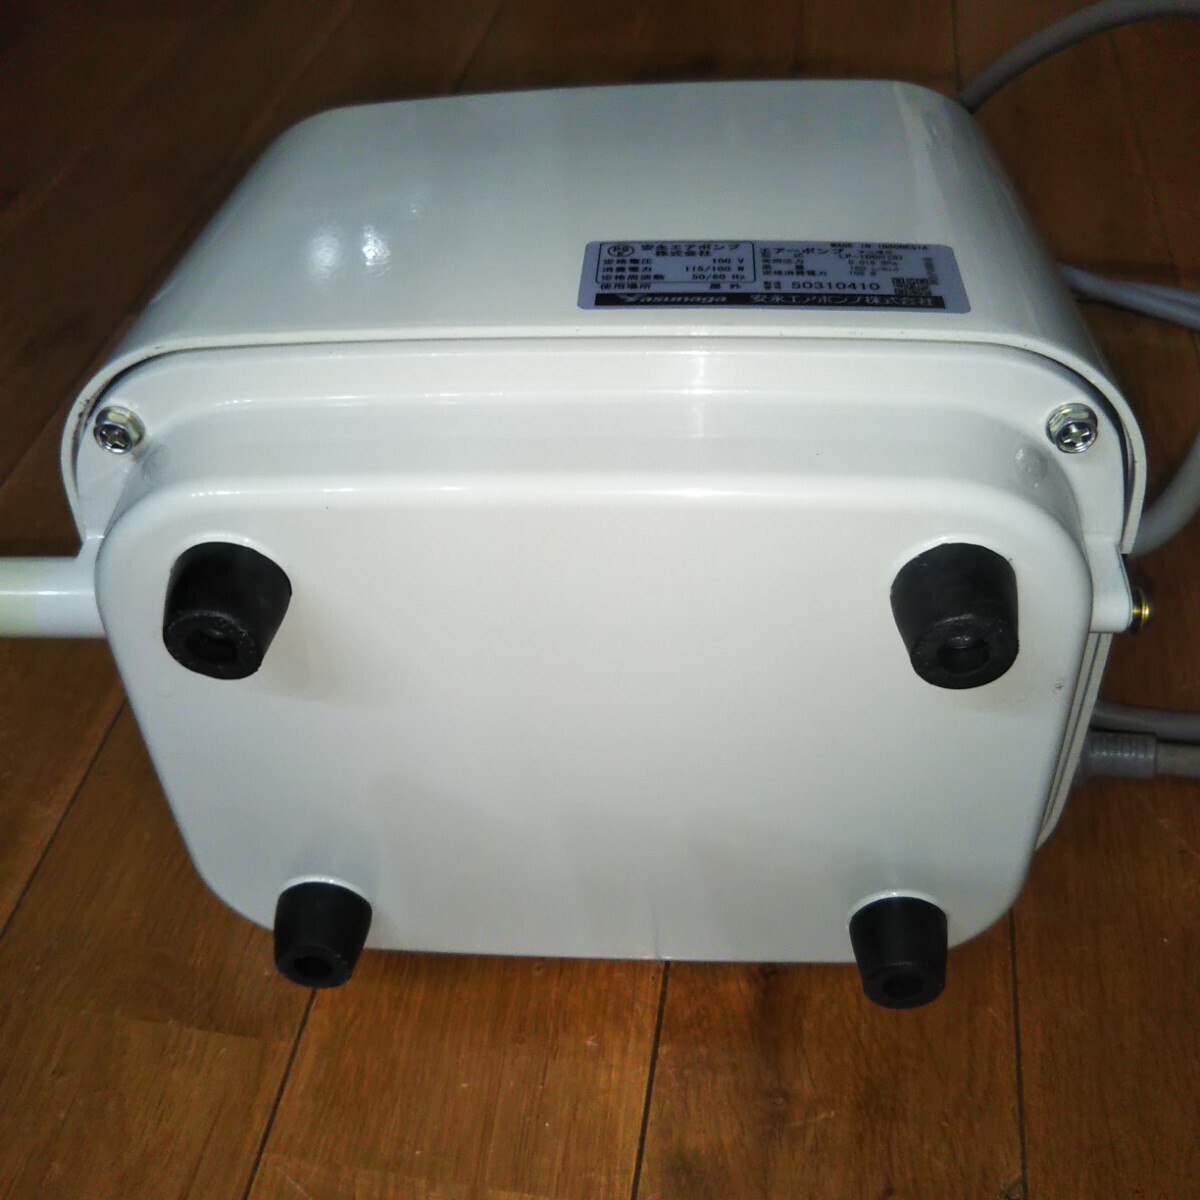 ... almost new goods almost unused beautiful goods blower blower diaphragm blower air pump cheap . air pump LP-100H air flow 100L/min working properly goods 